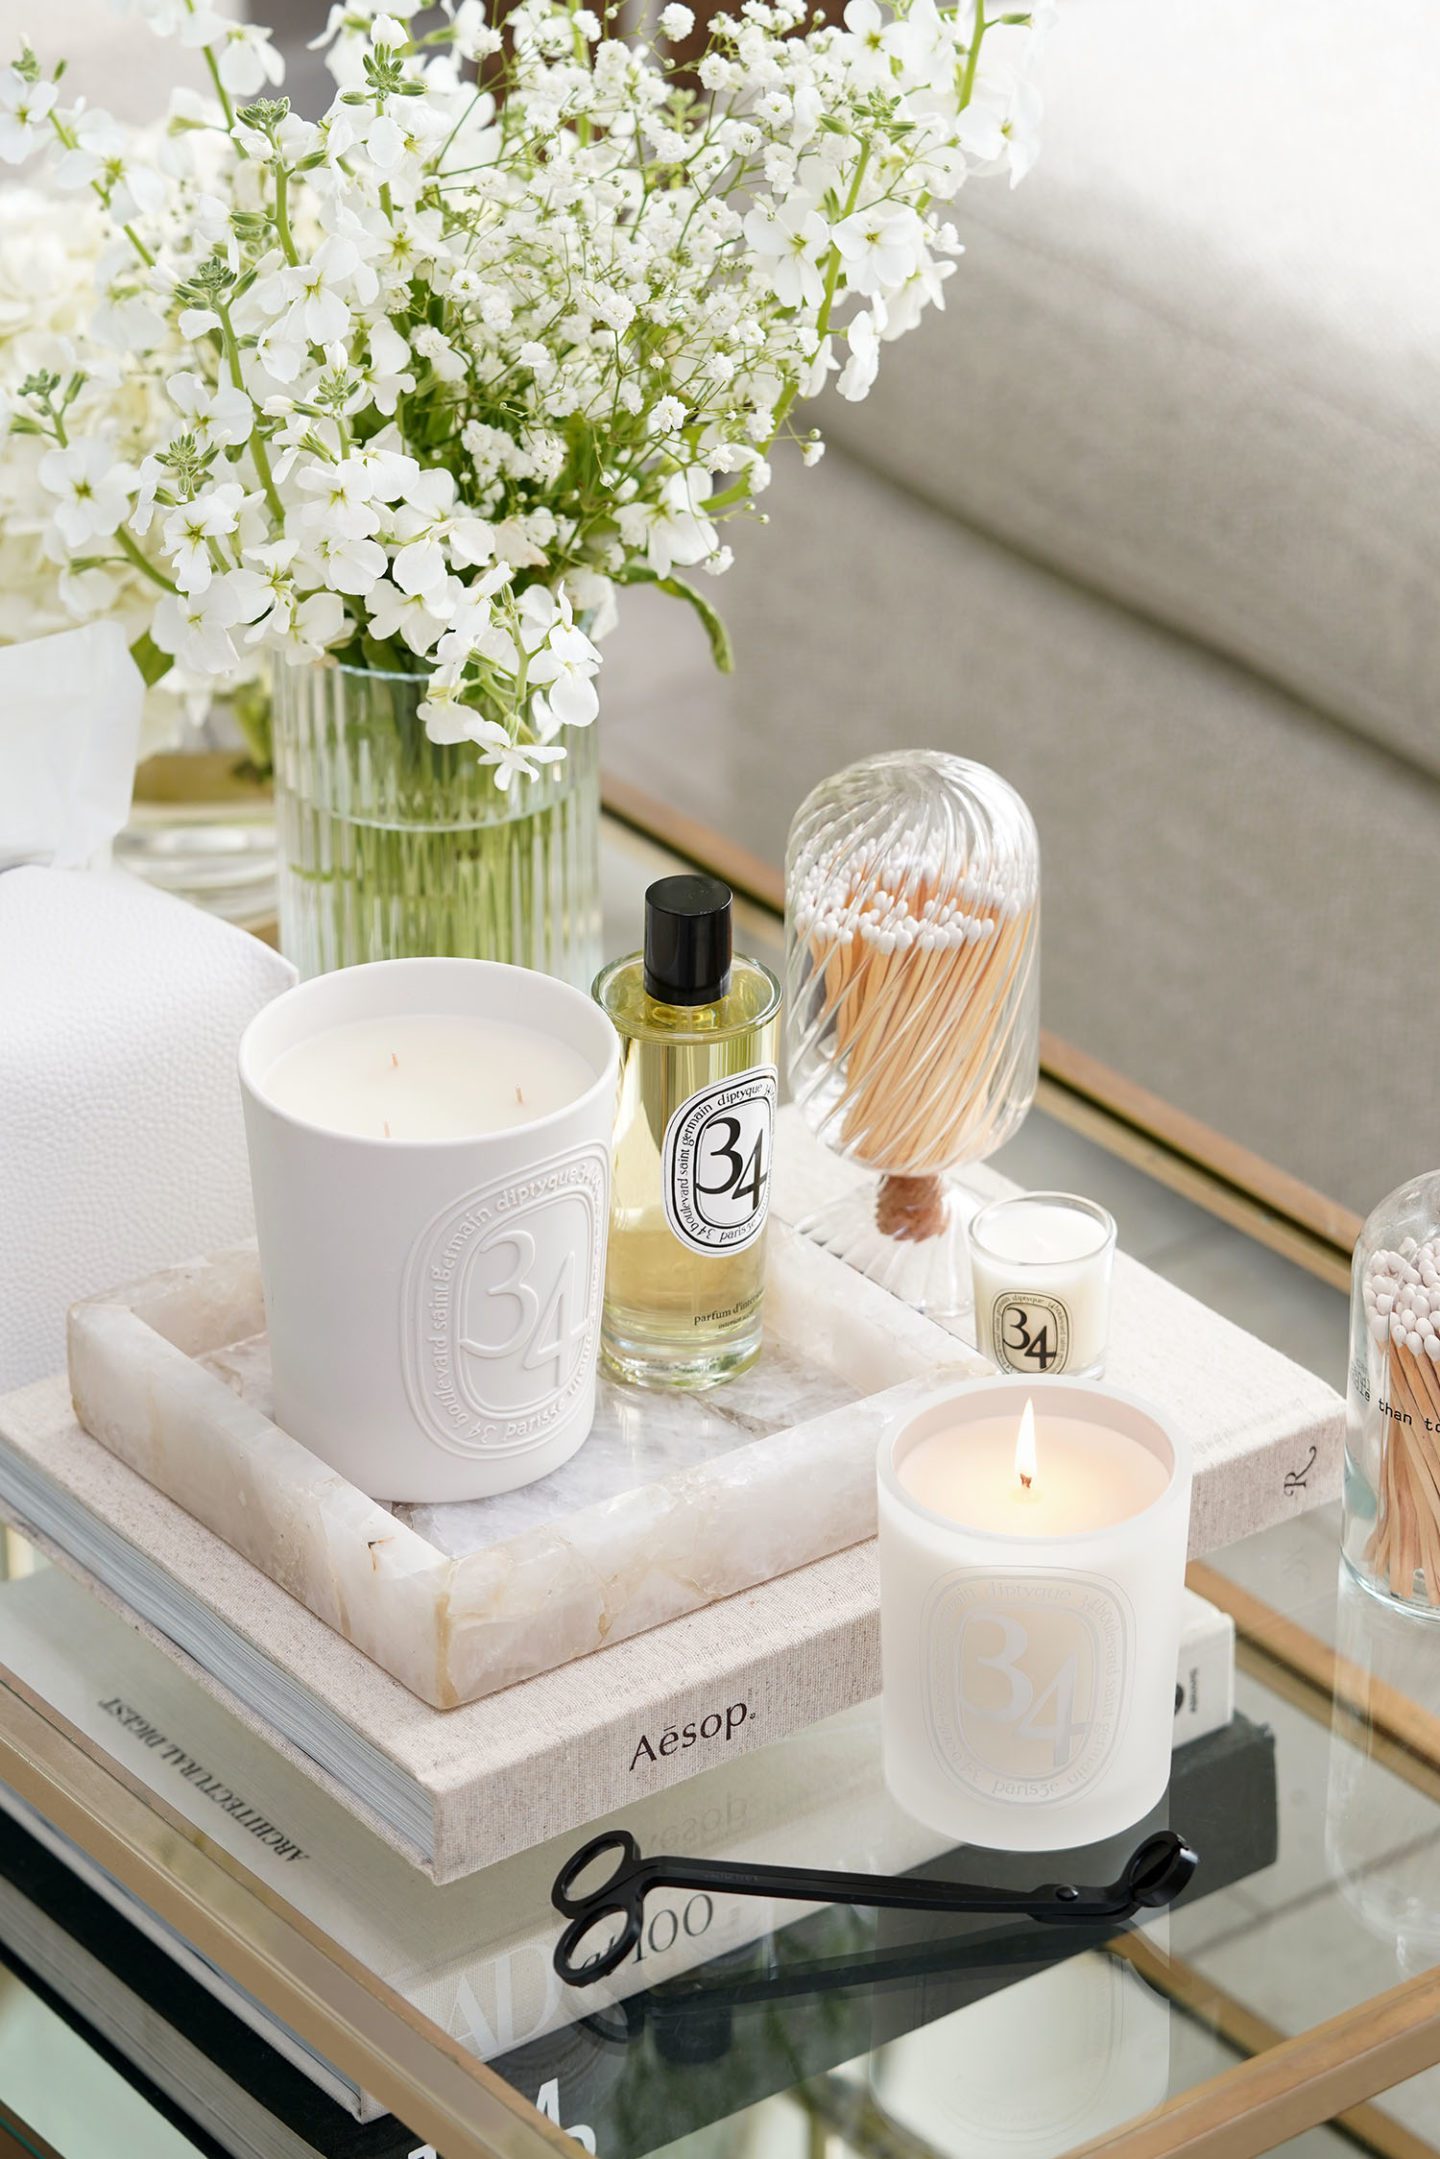 Diptyque 34 Collection